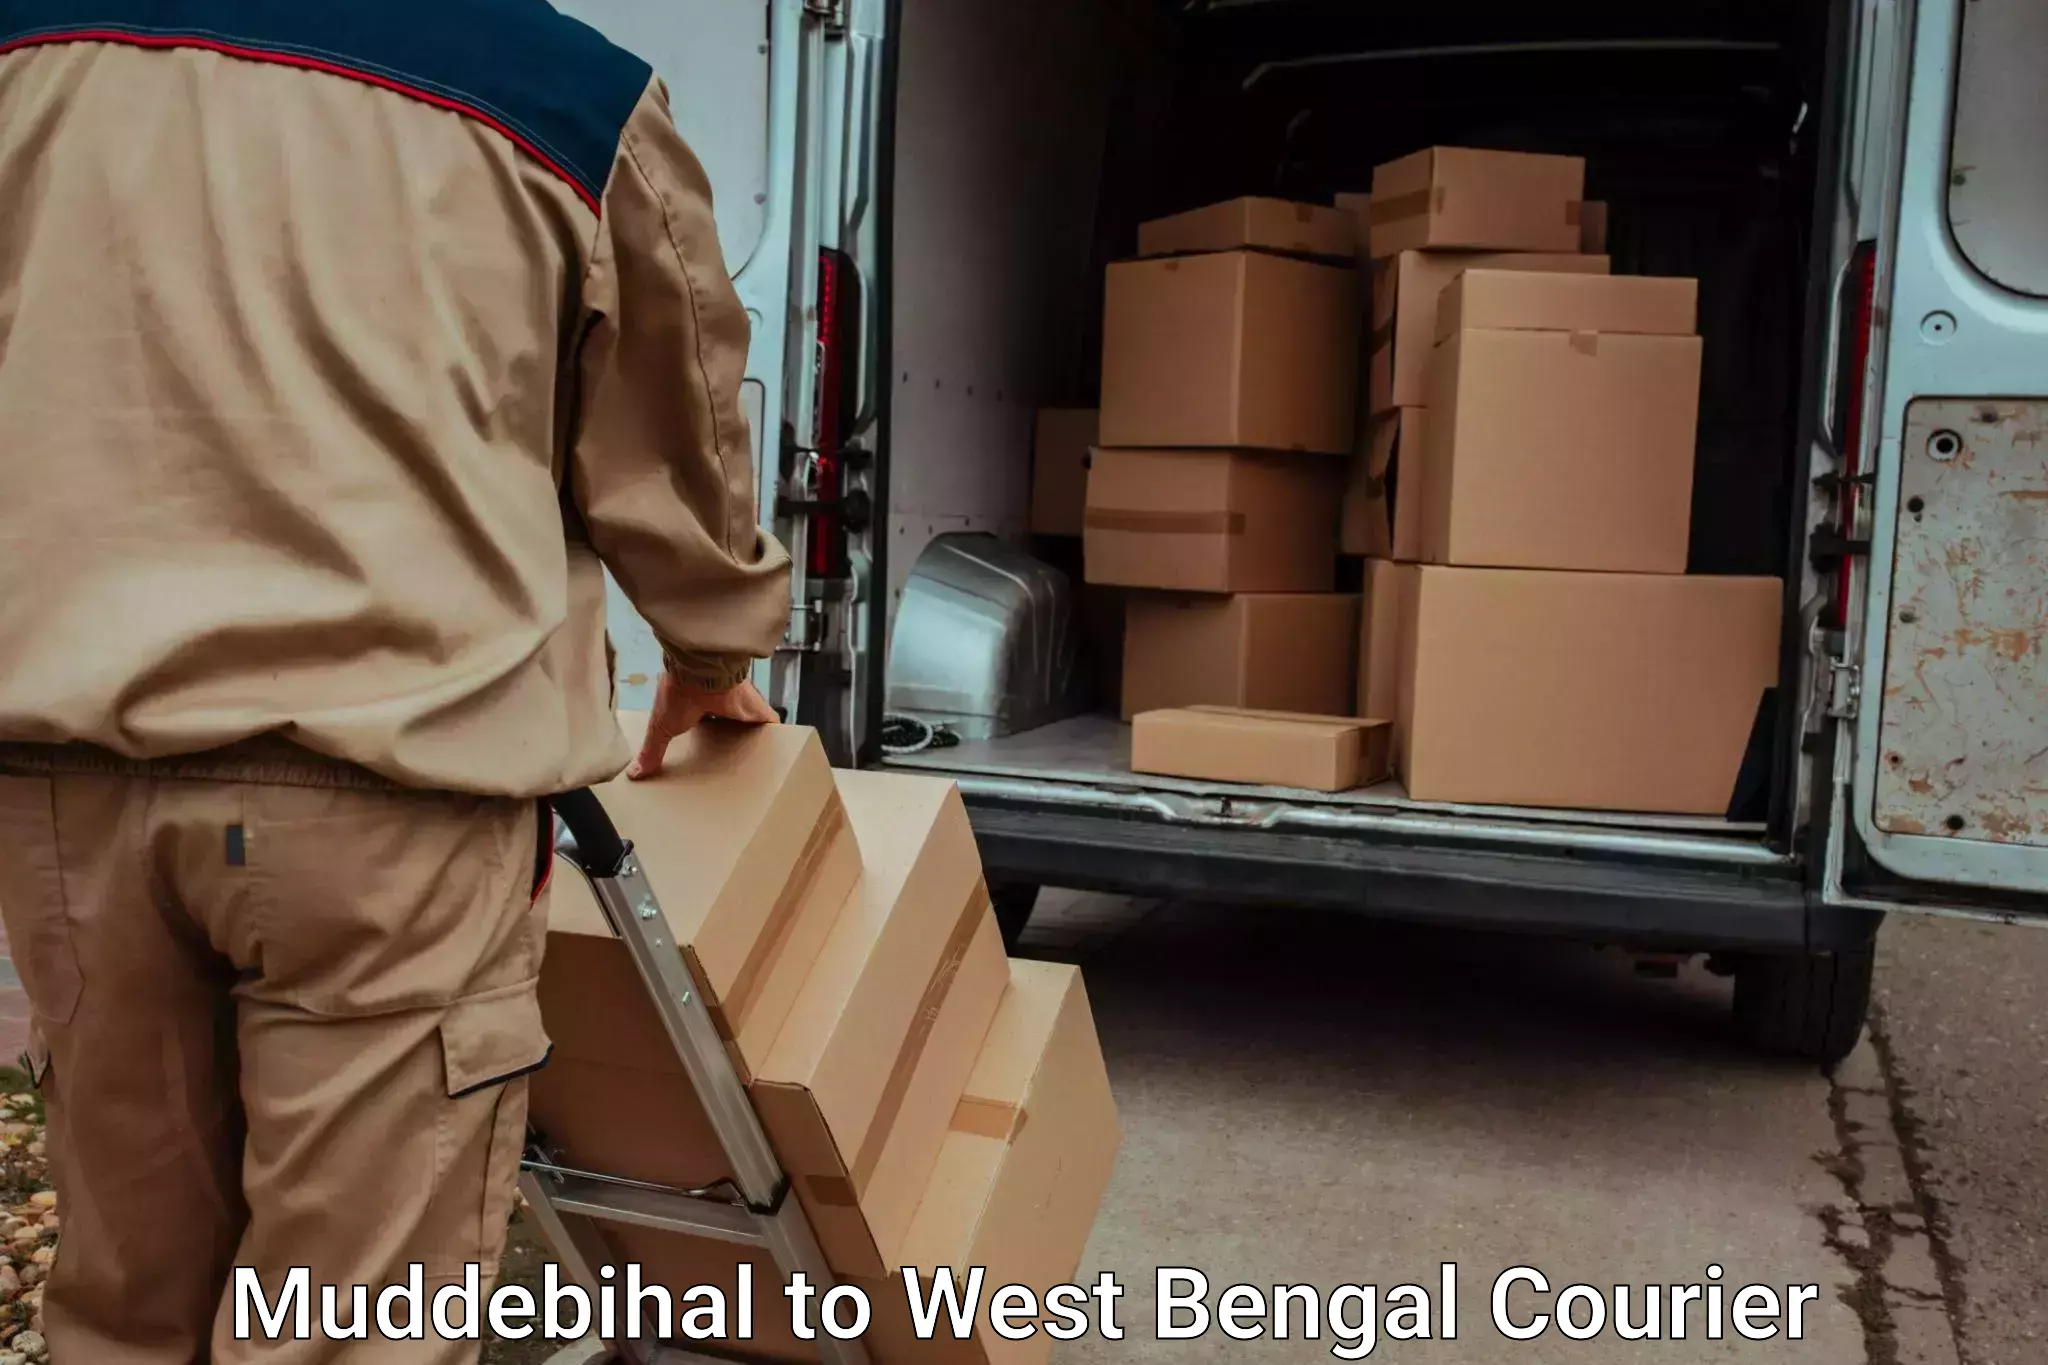 Trusted moving company in Muddebihal to Para Purulia